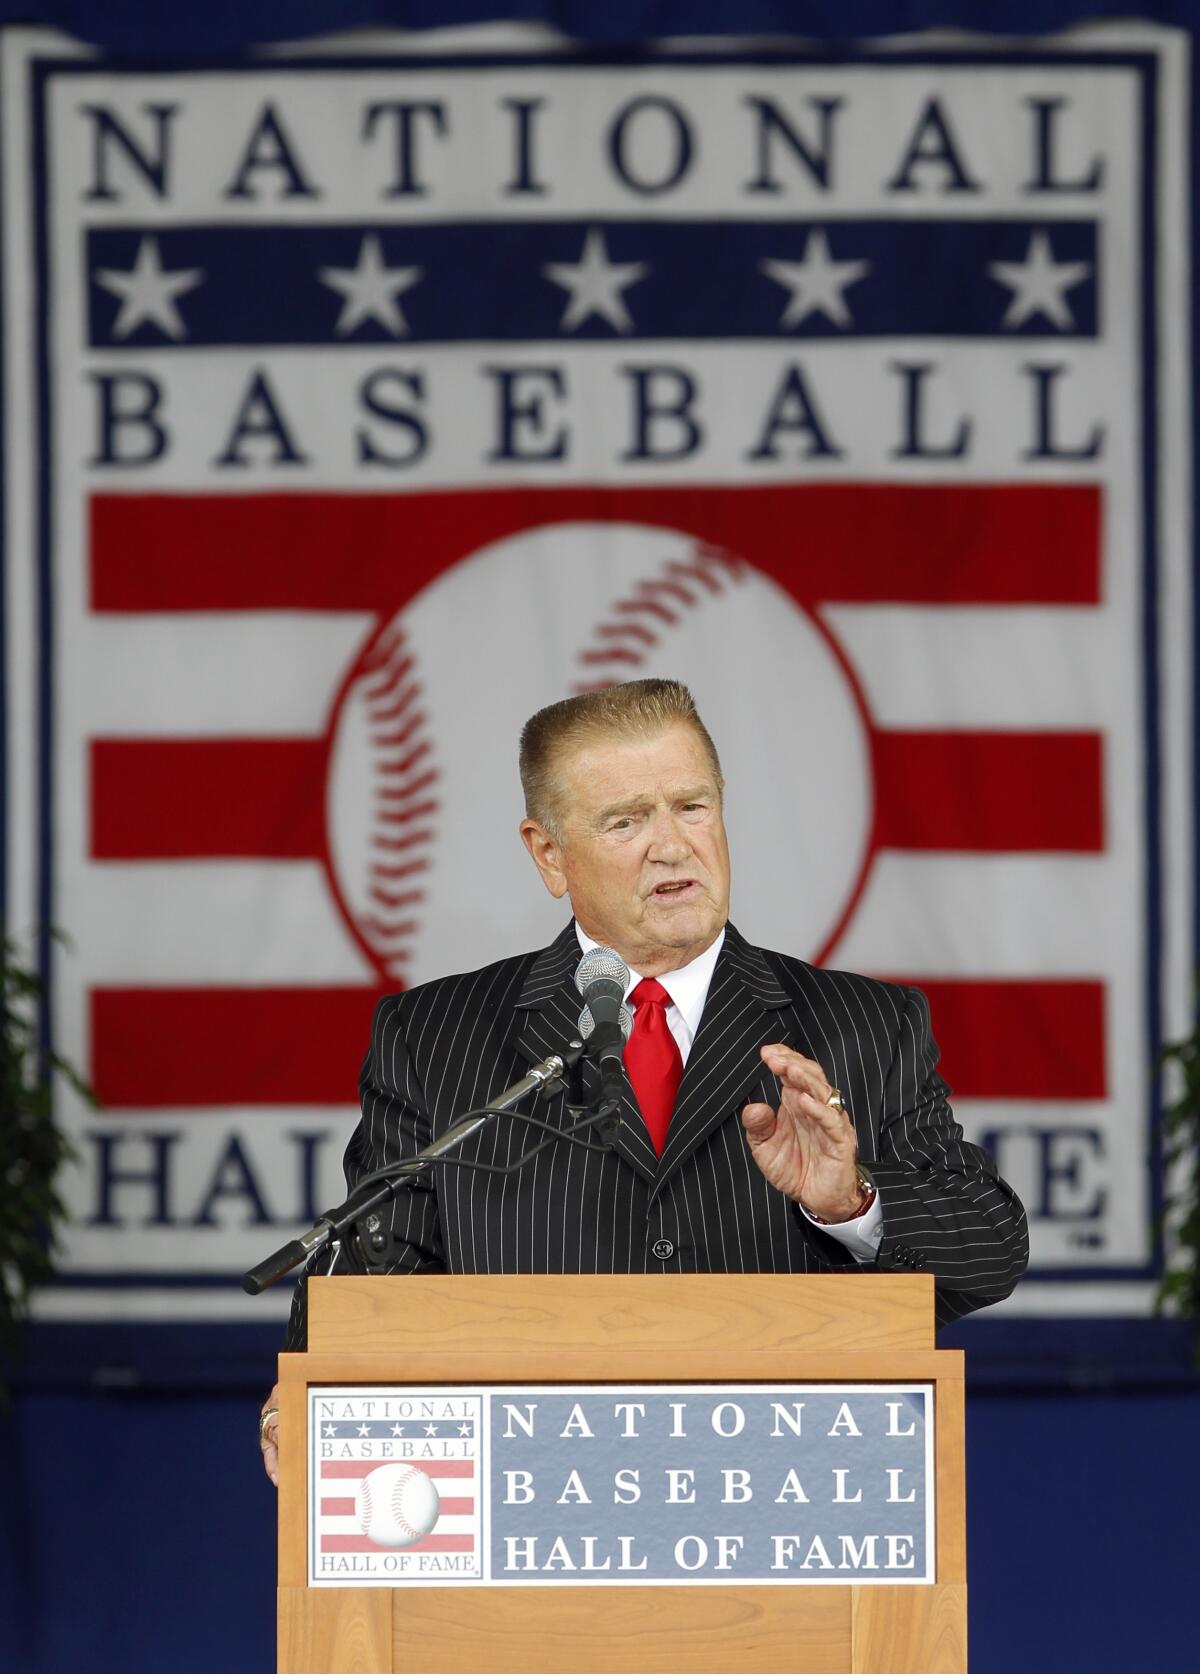 Whitey Herzog at his Baseball Hall of Fame induction in 2010.